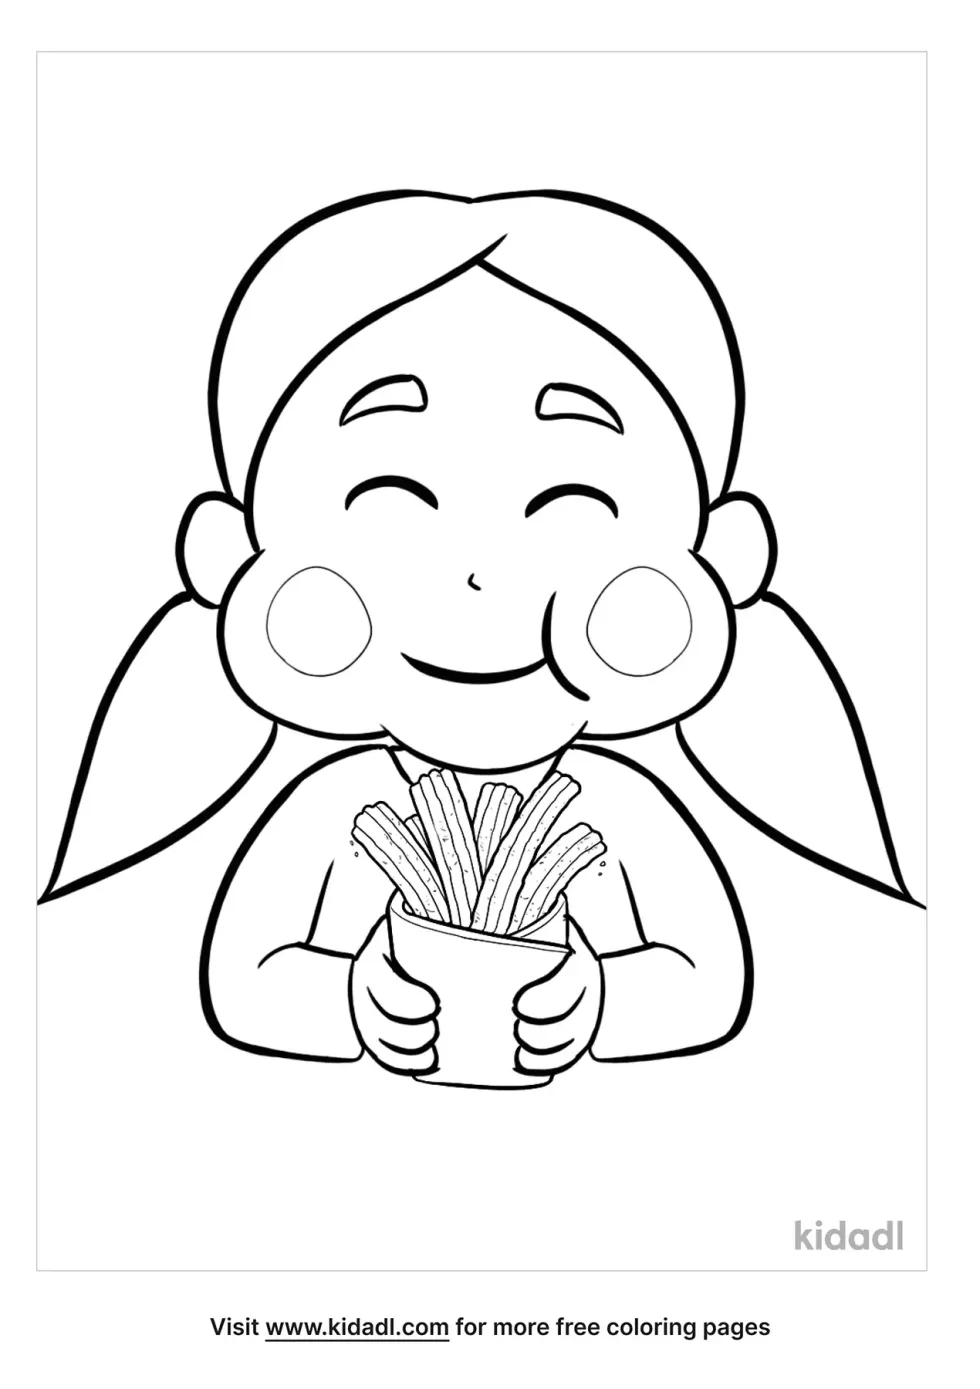 Child With Food In Cheeks Coloring Page